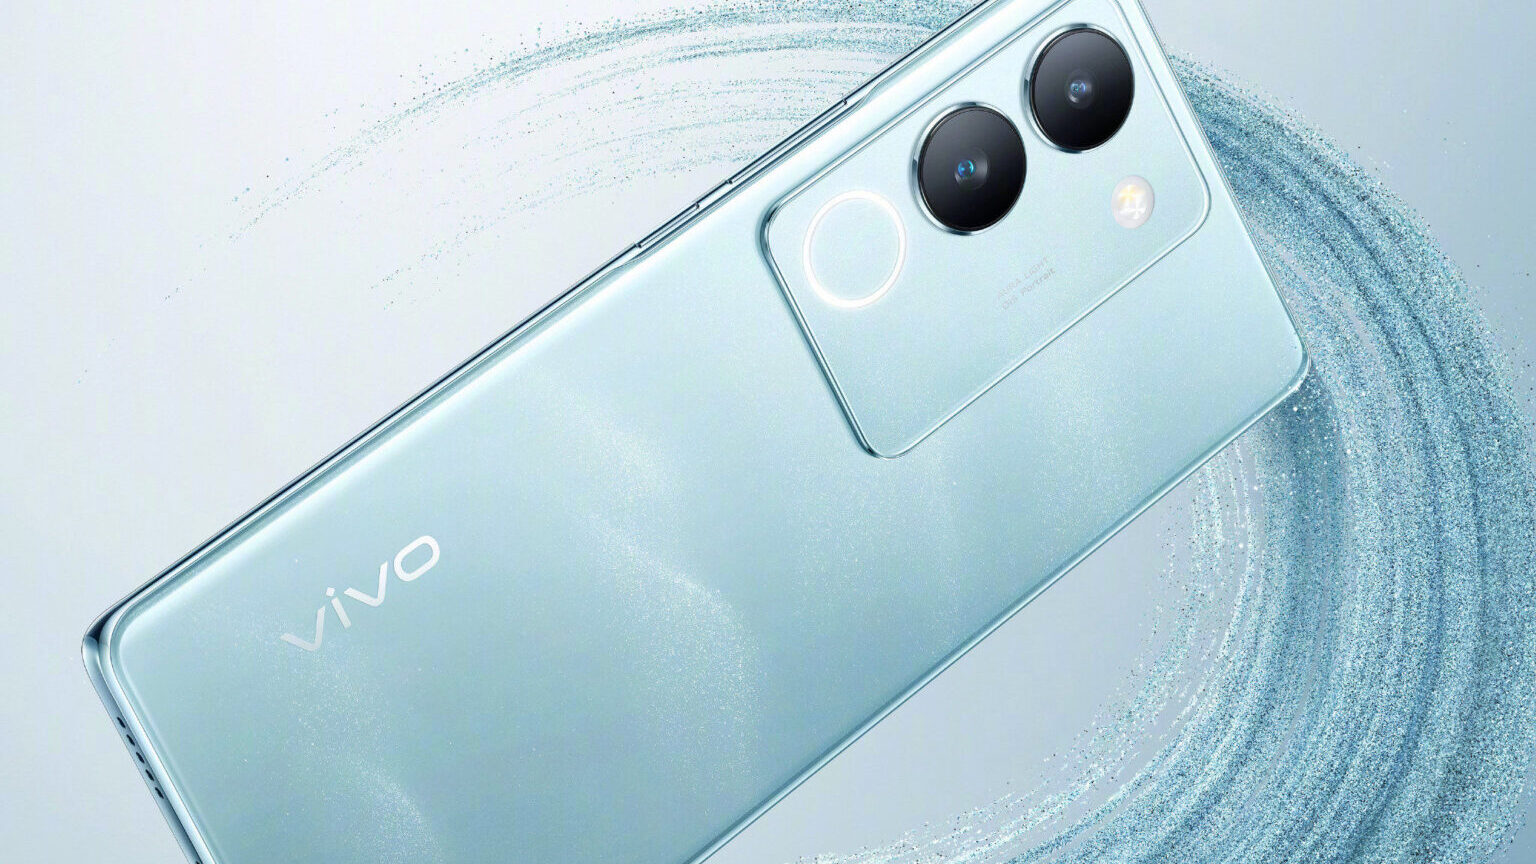 Vivo S17 5G, Powered by Snapdragon 778G+ SoC and 12GB RAM, Spotted on Geekbench Prior to May 31st Unveiling